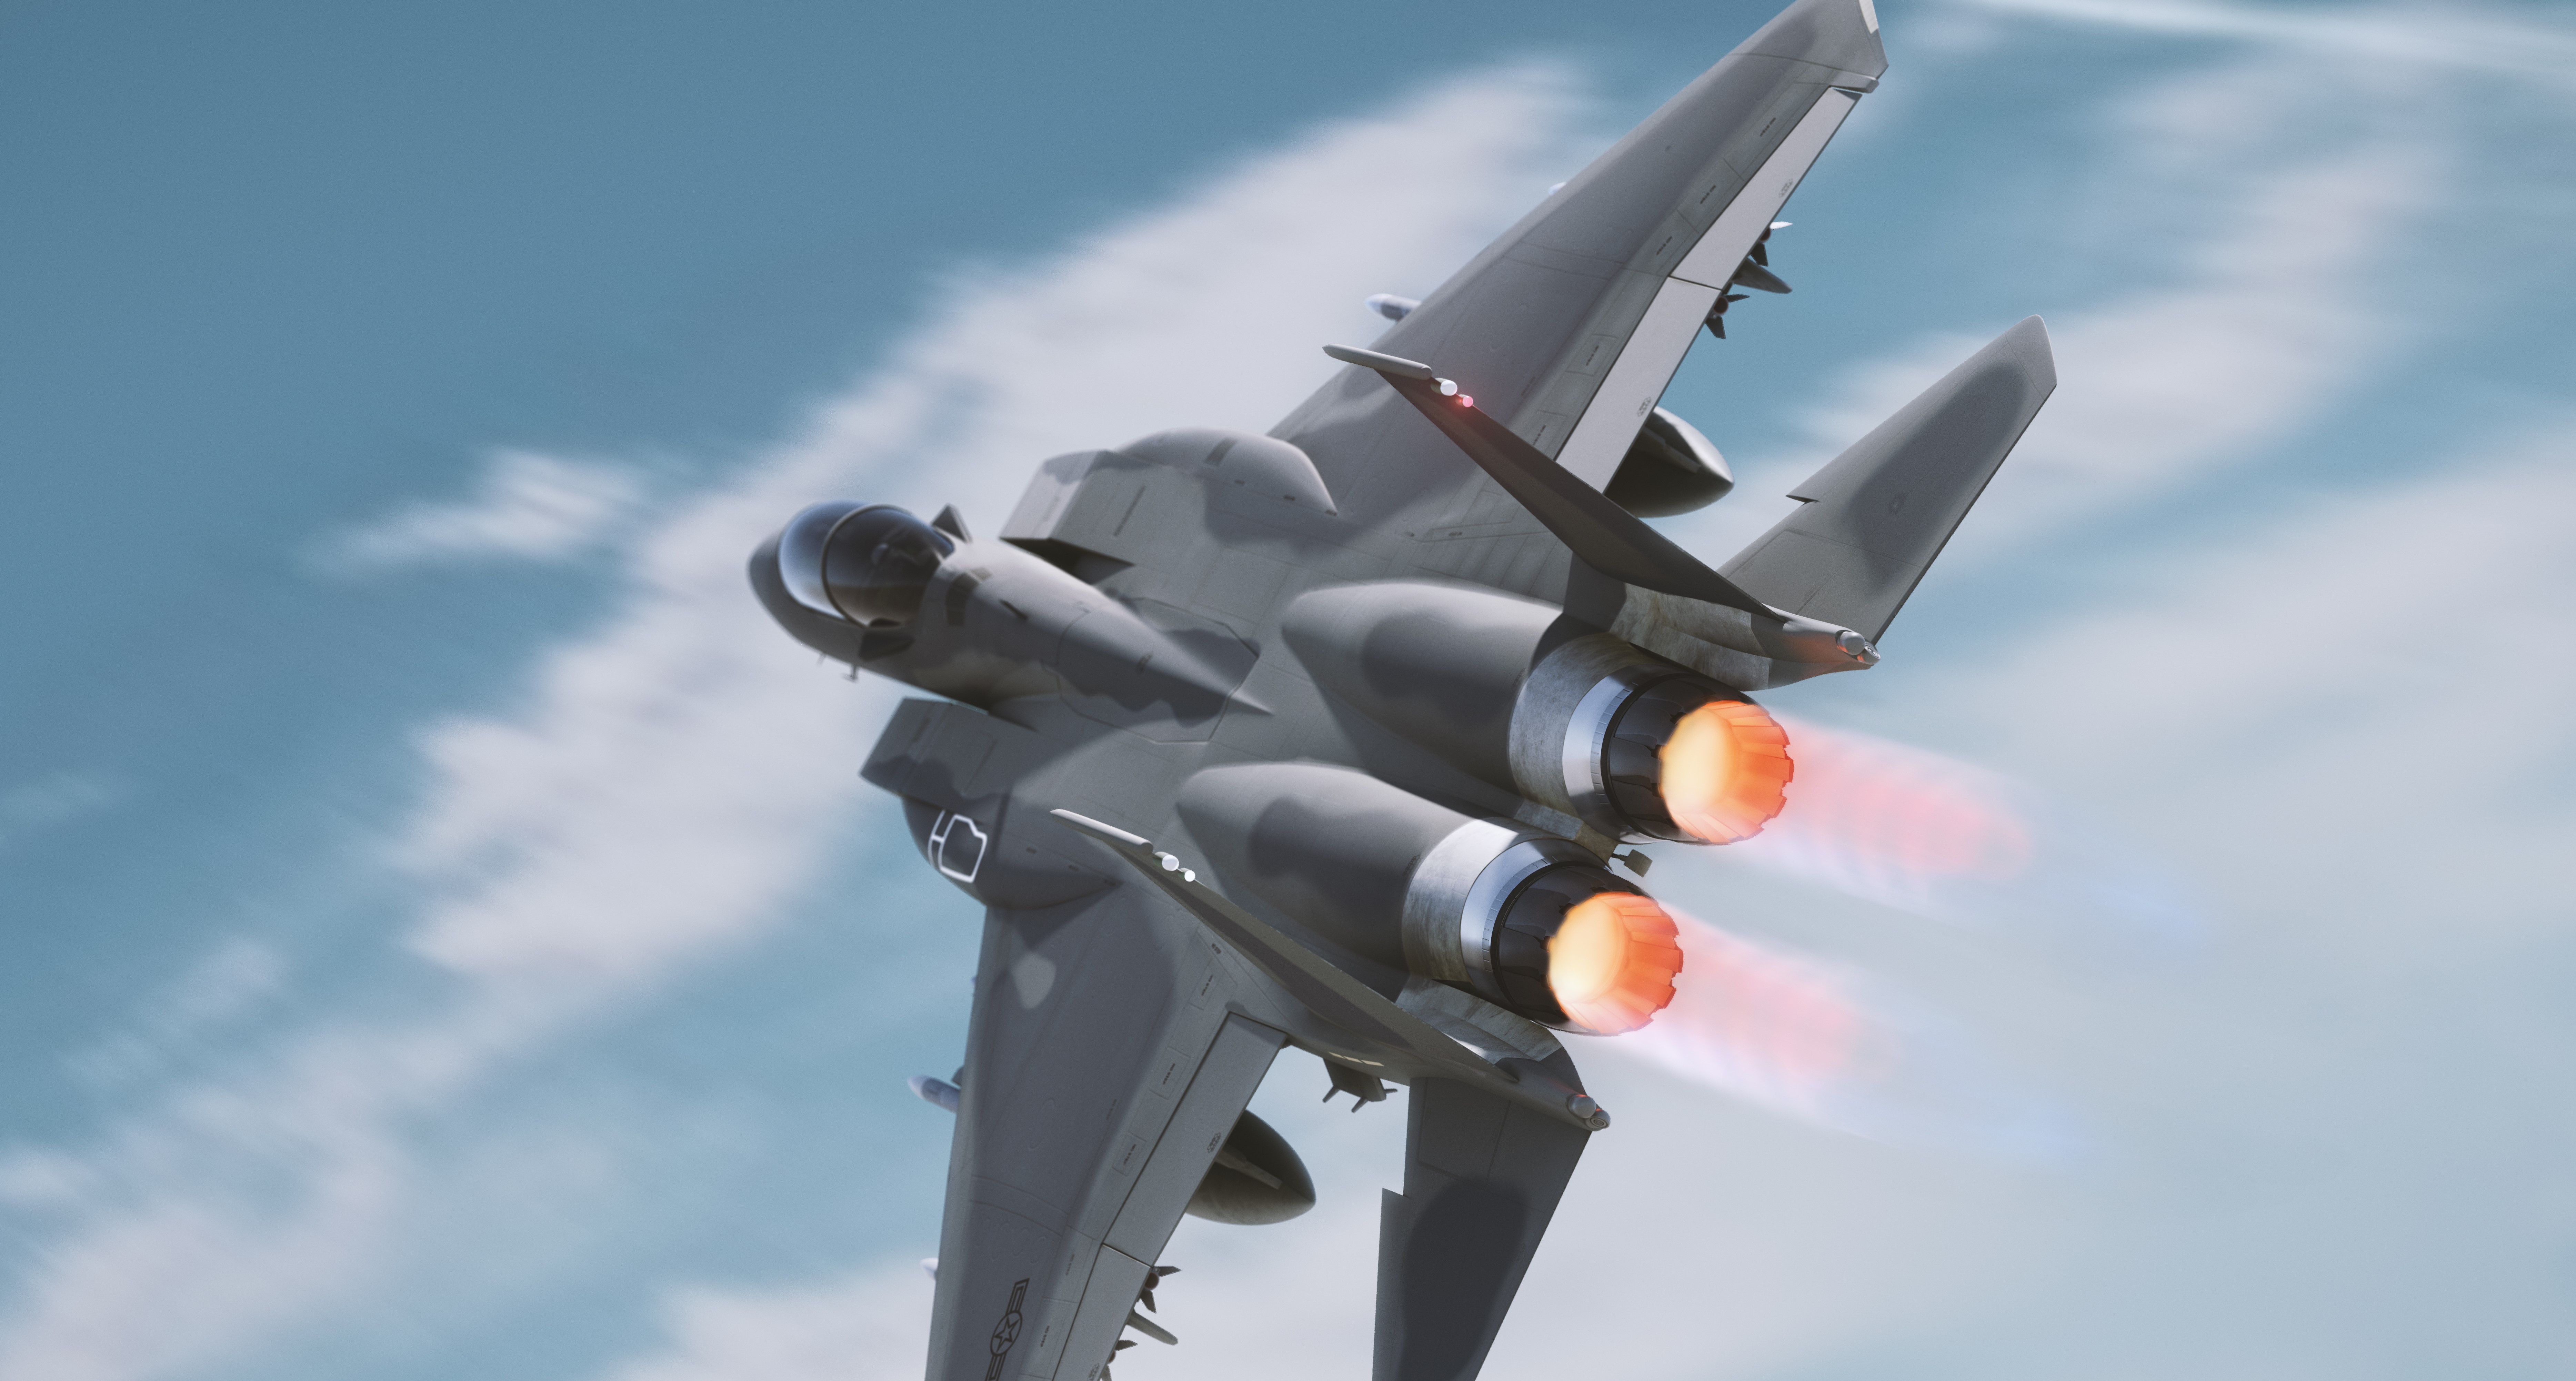 Two F110 engines power the F-15EX Eagle II